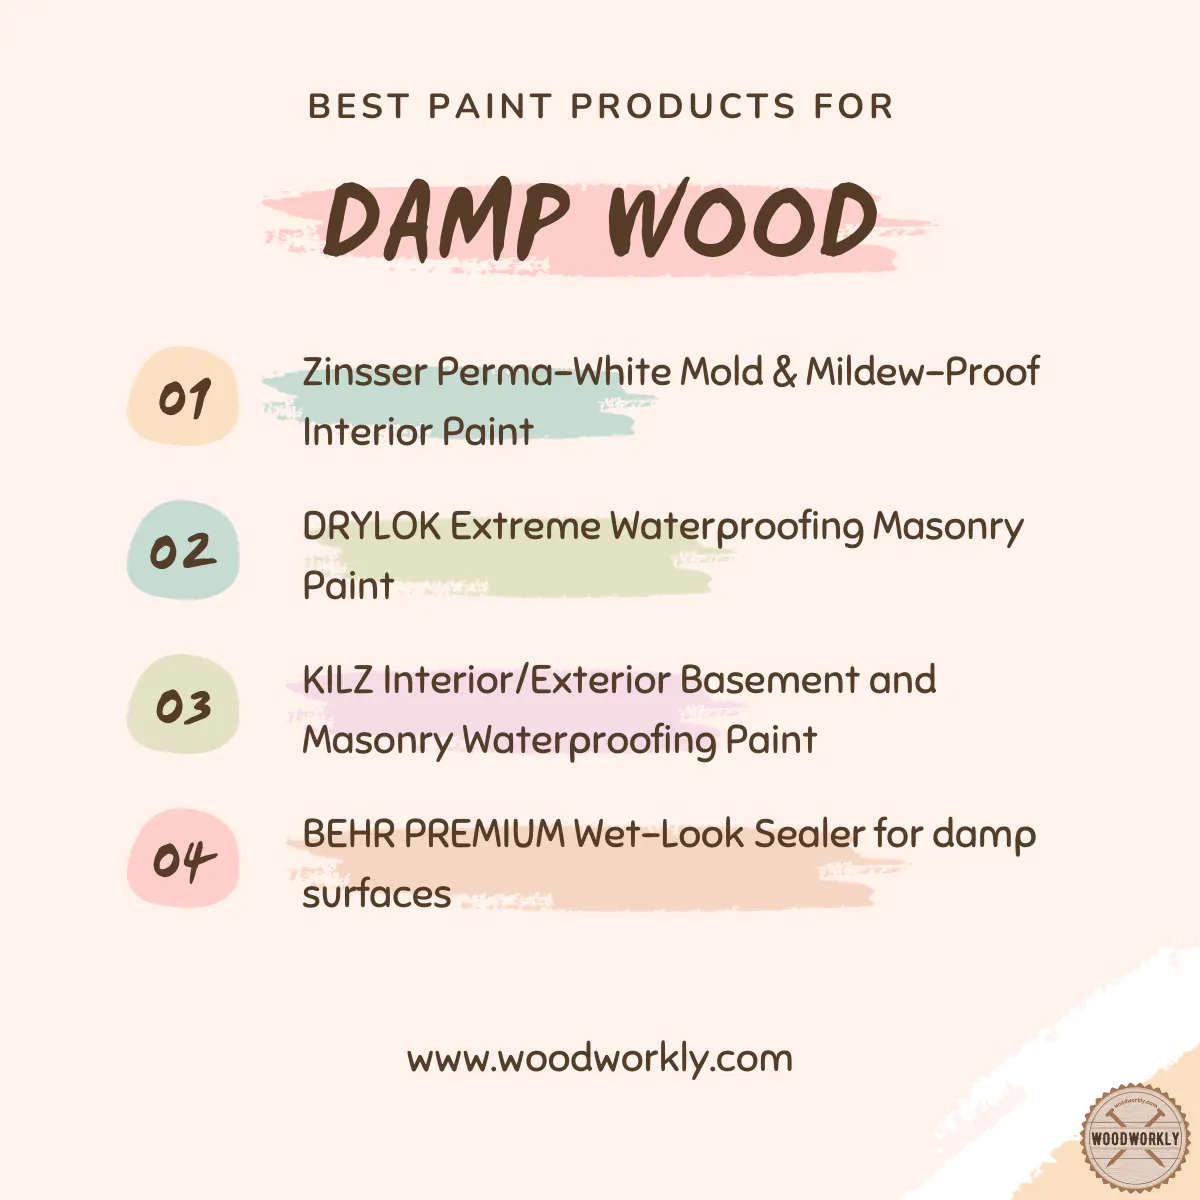 Best paint products for damp wood